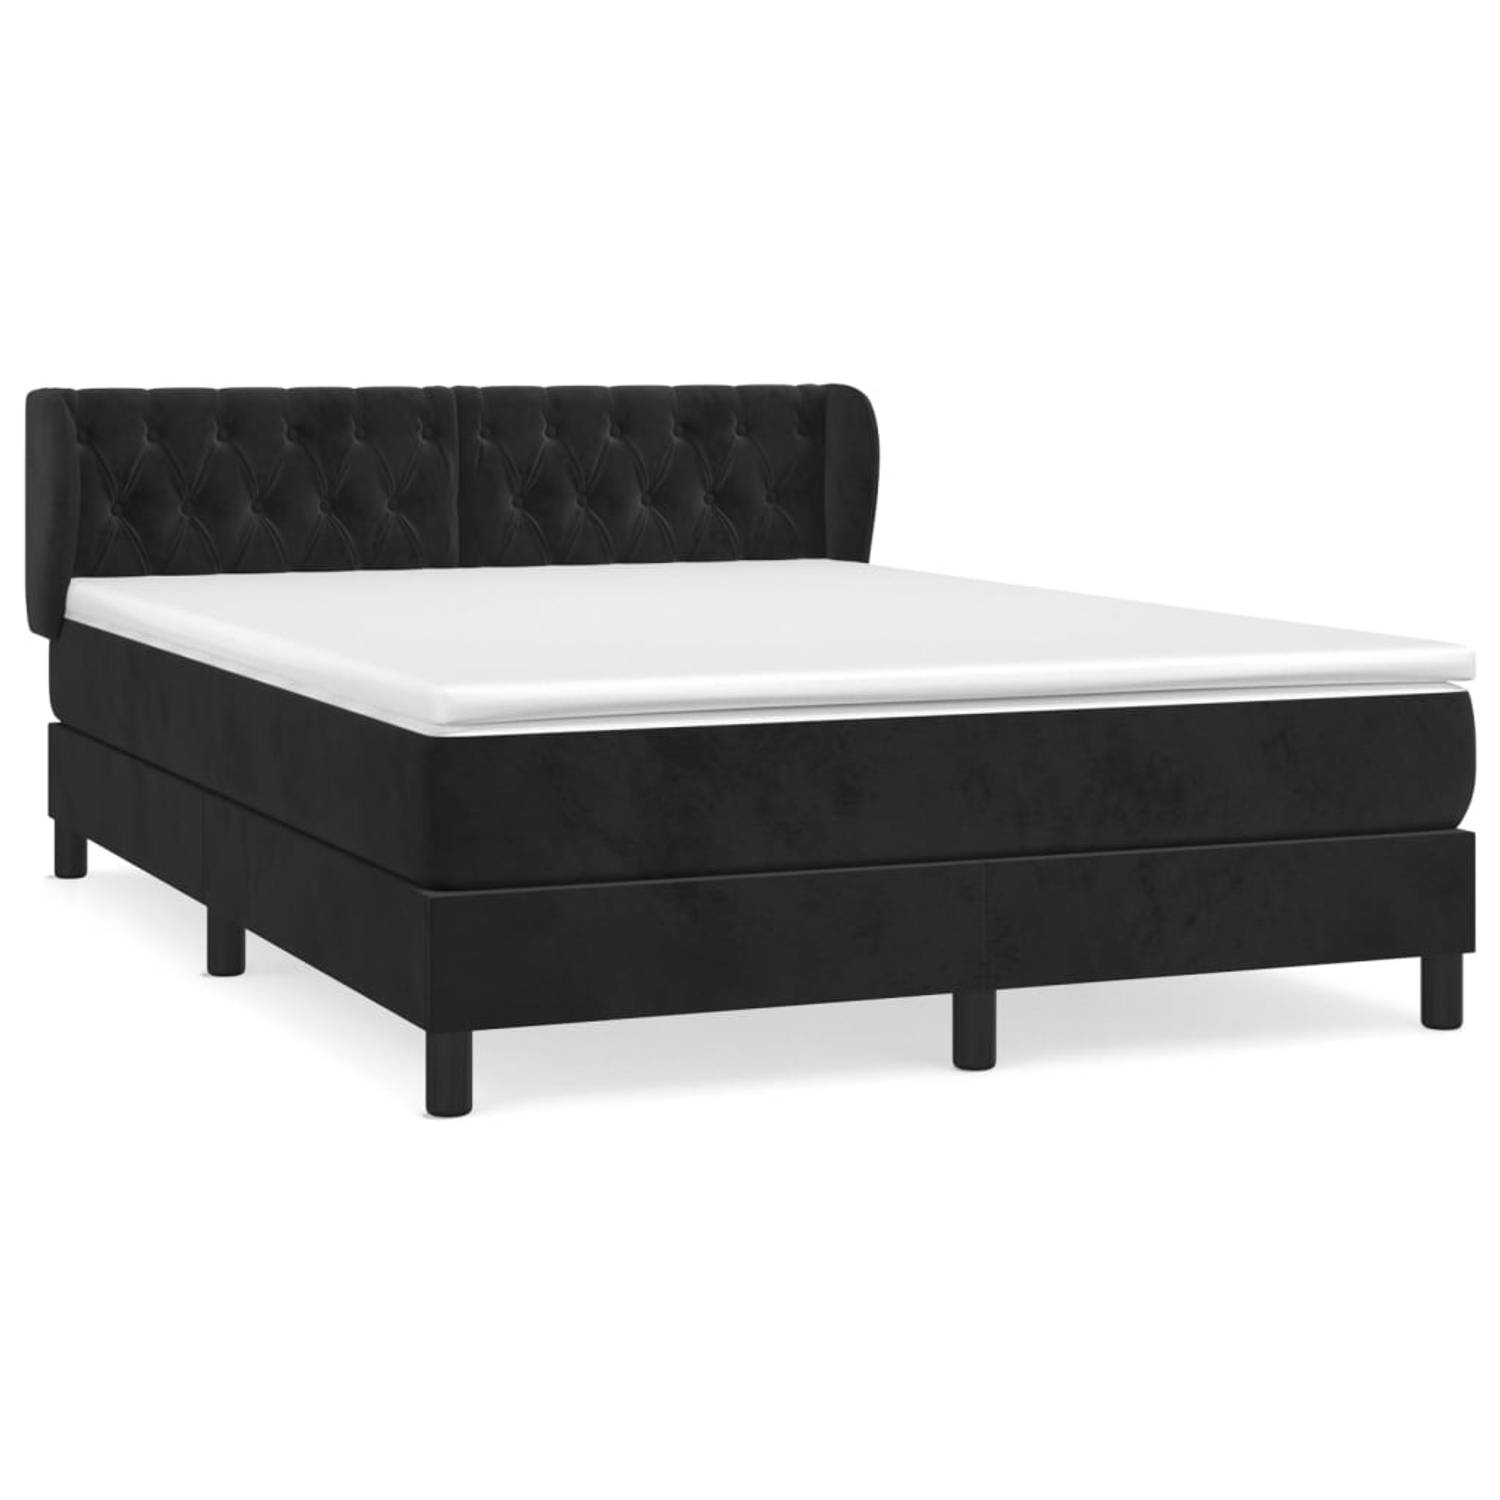 The Living Store boxspringbed - Luxe - Bed - 193 x 147 x 78/88 cm - Zacht fluweel